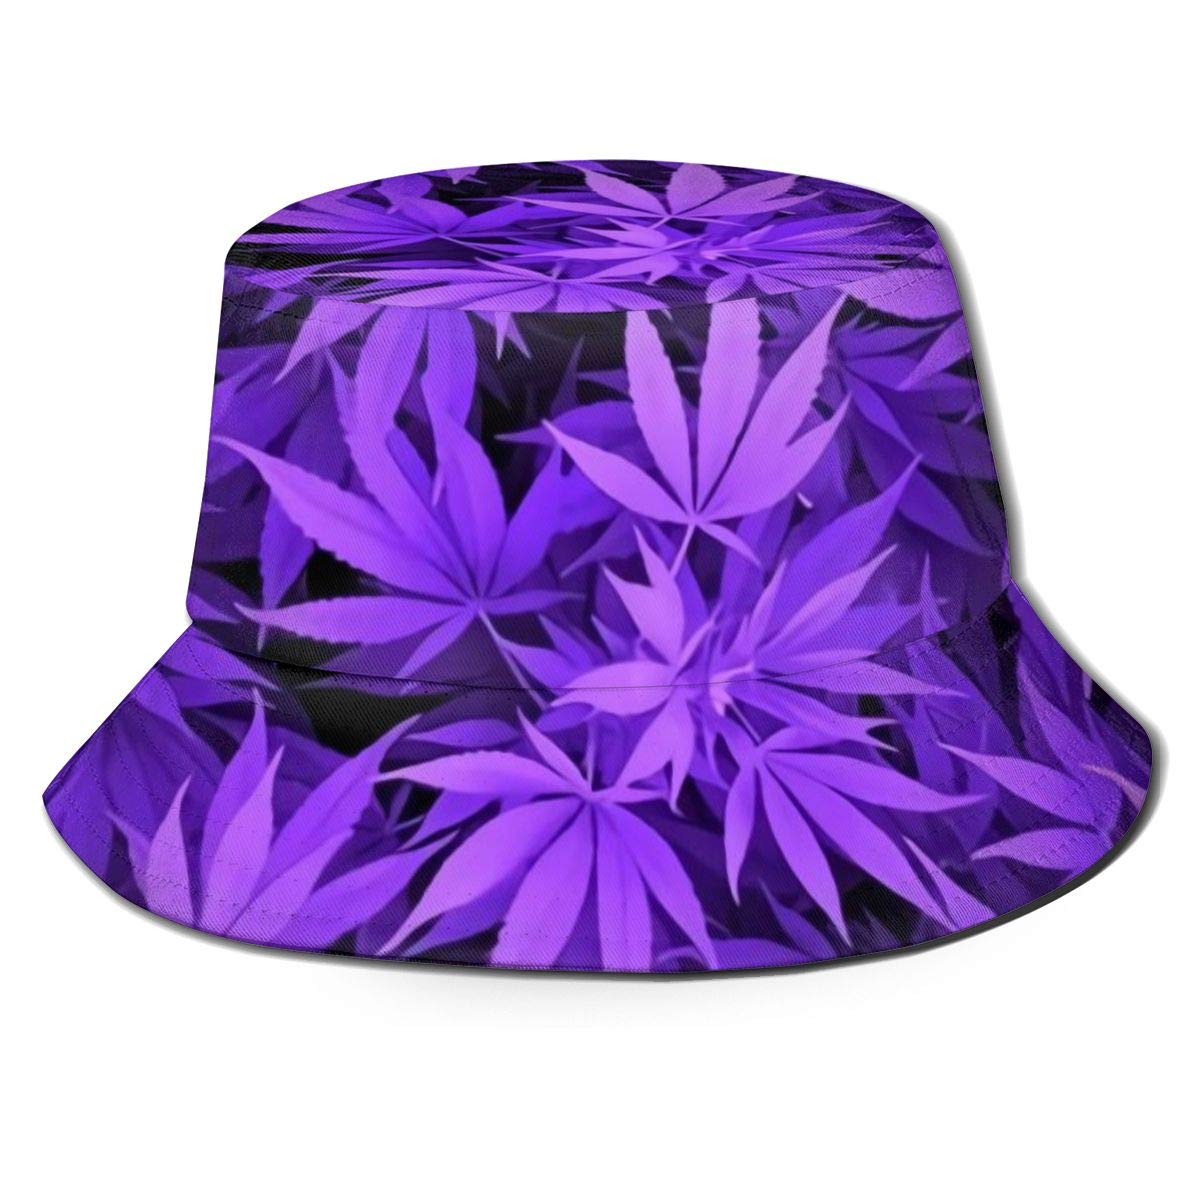 Zhung Ree Purple Cannabis Weed Leaves Bucket Hat for Men, Women, Kids -  Summer Cap Fishing Hat One Size